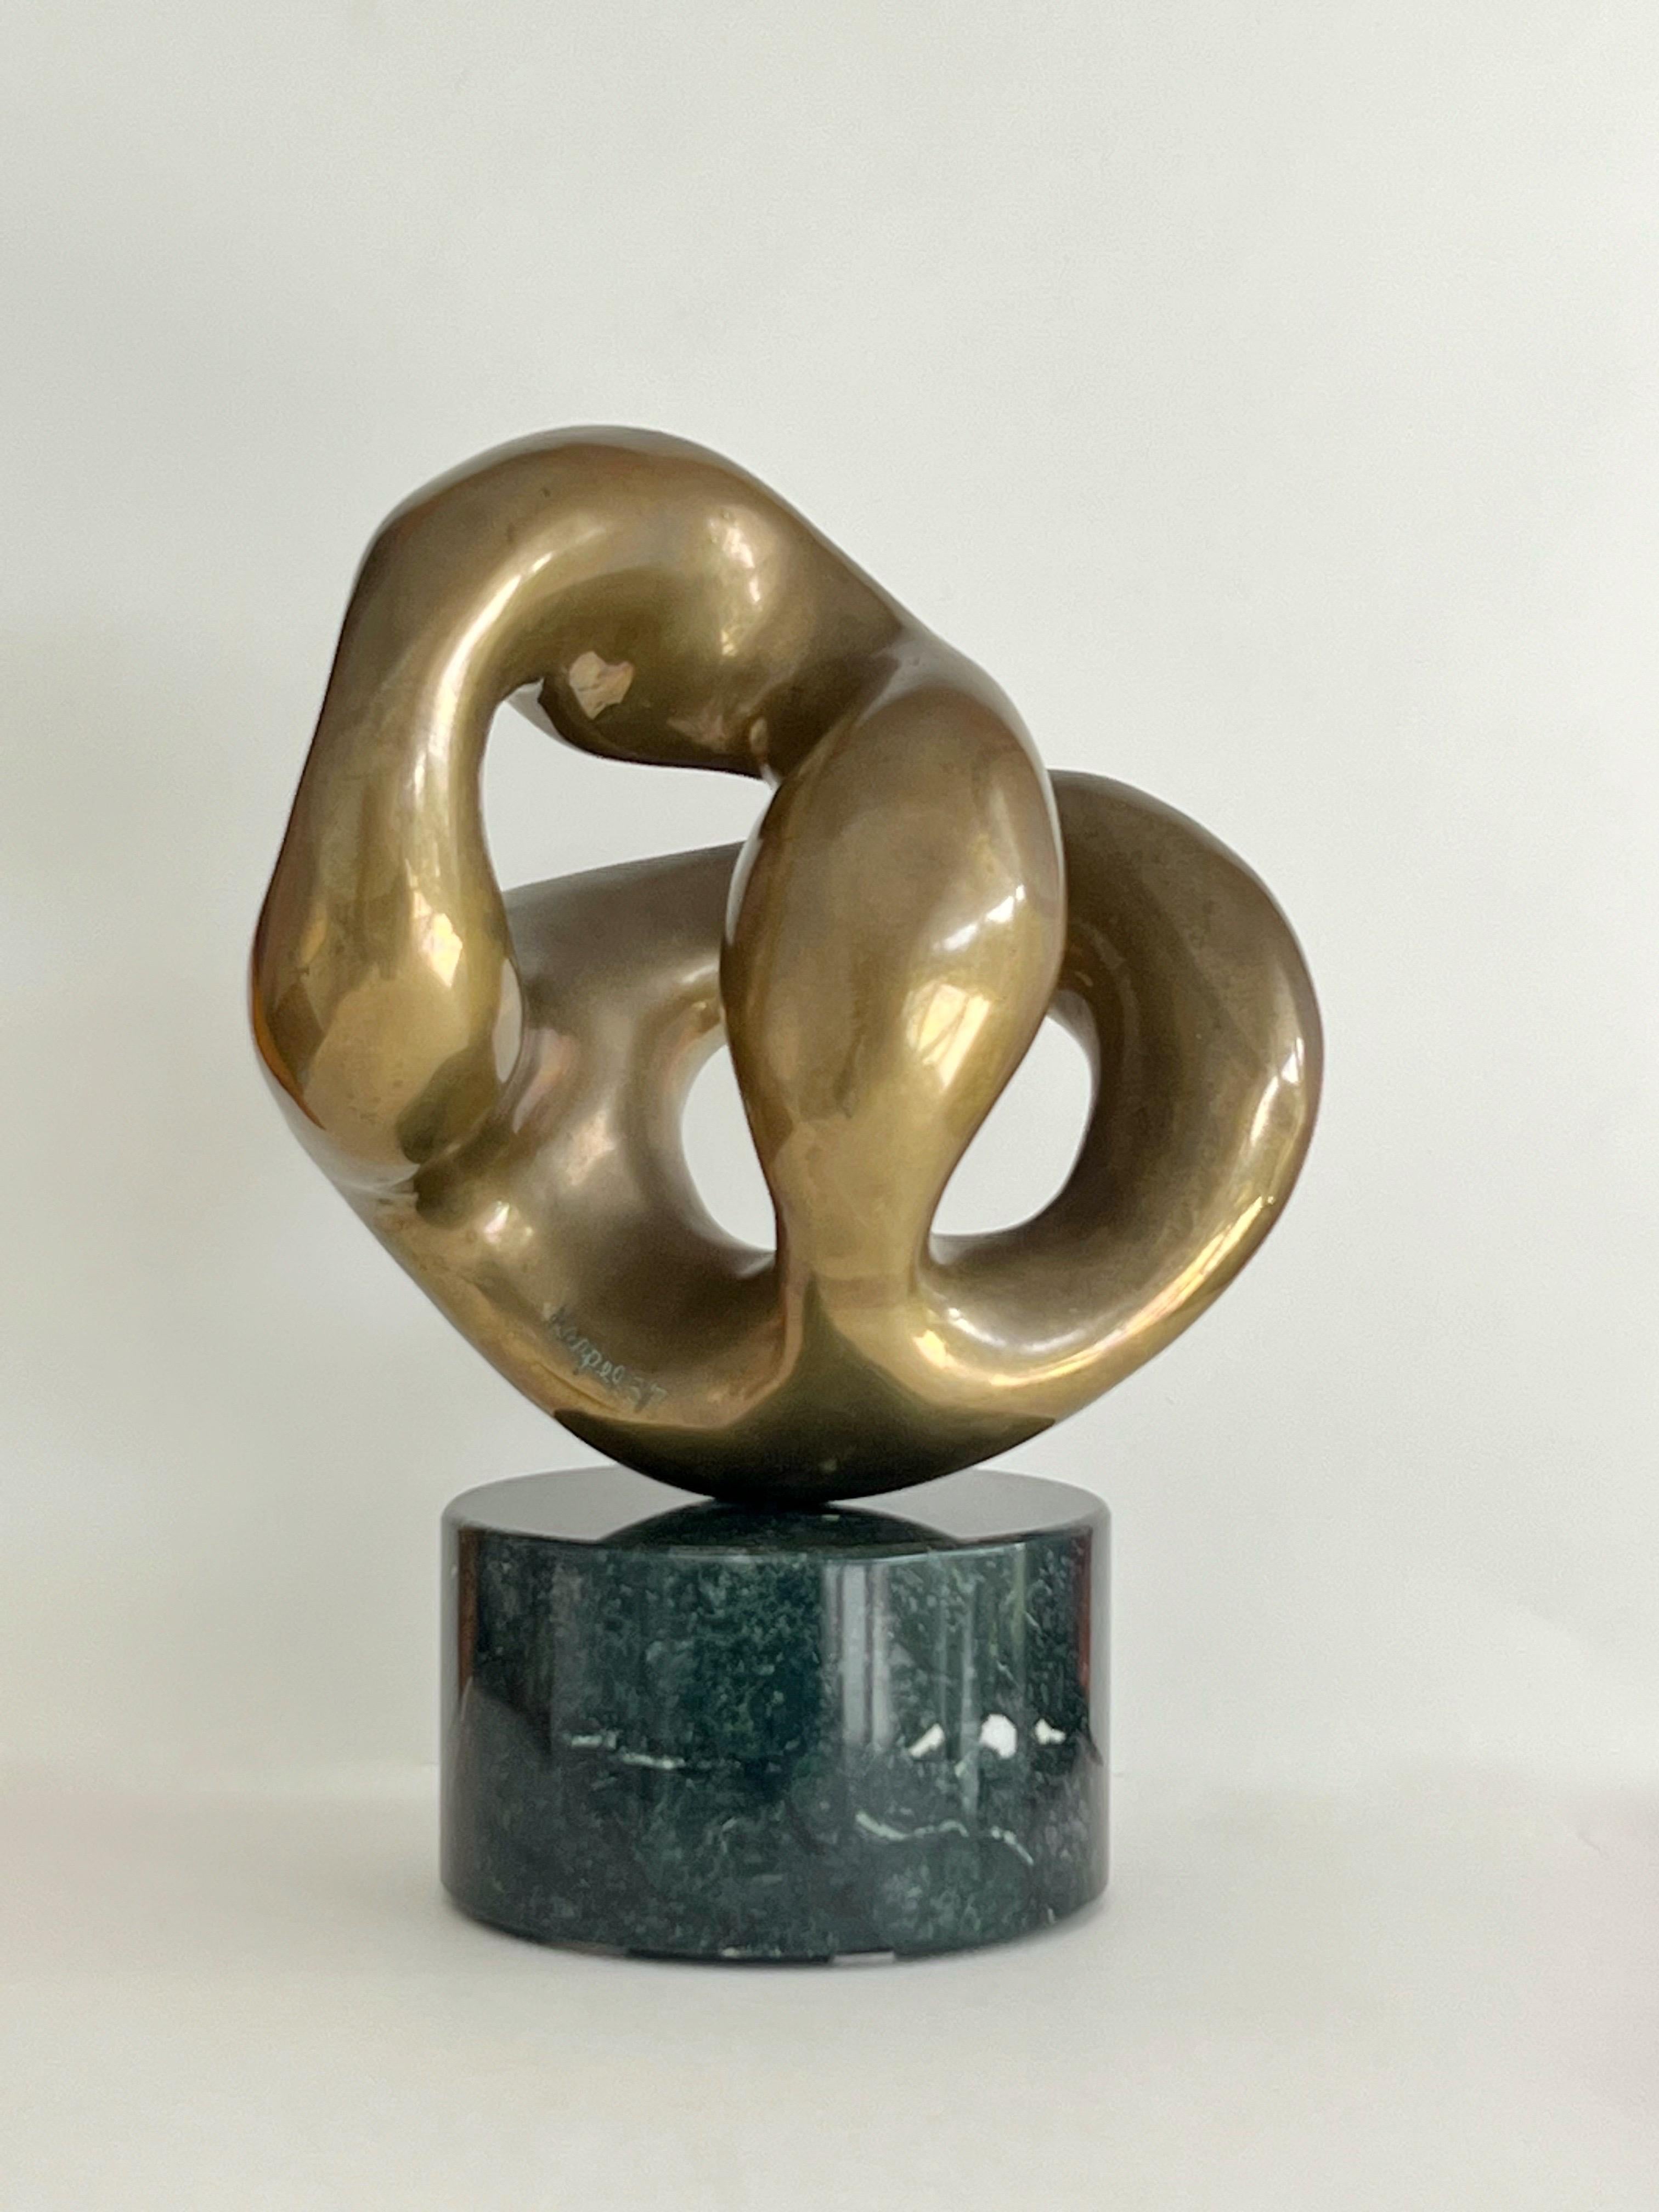 A solid abstract bronze sculpture on marble base by Eli Karpel. An amorphous biomorphic shape that seams to transform as you change perspective. Number 3 of a small edition of seven. On its original marble base. Bronze without base is 11.5